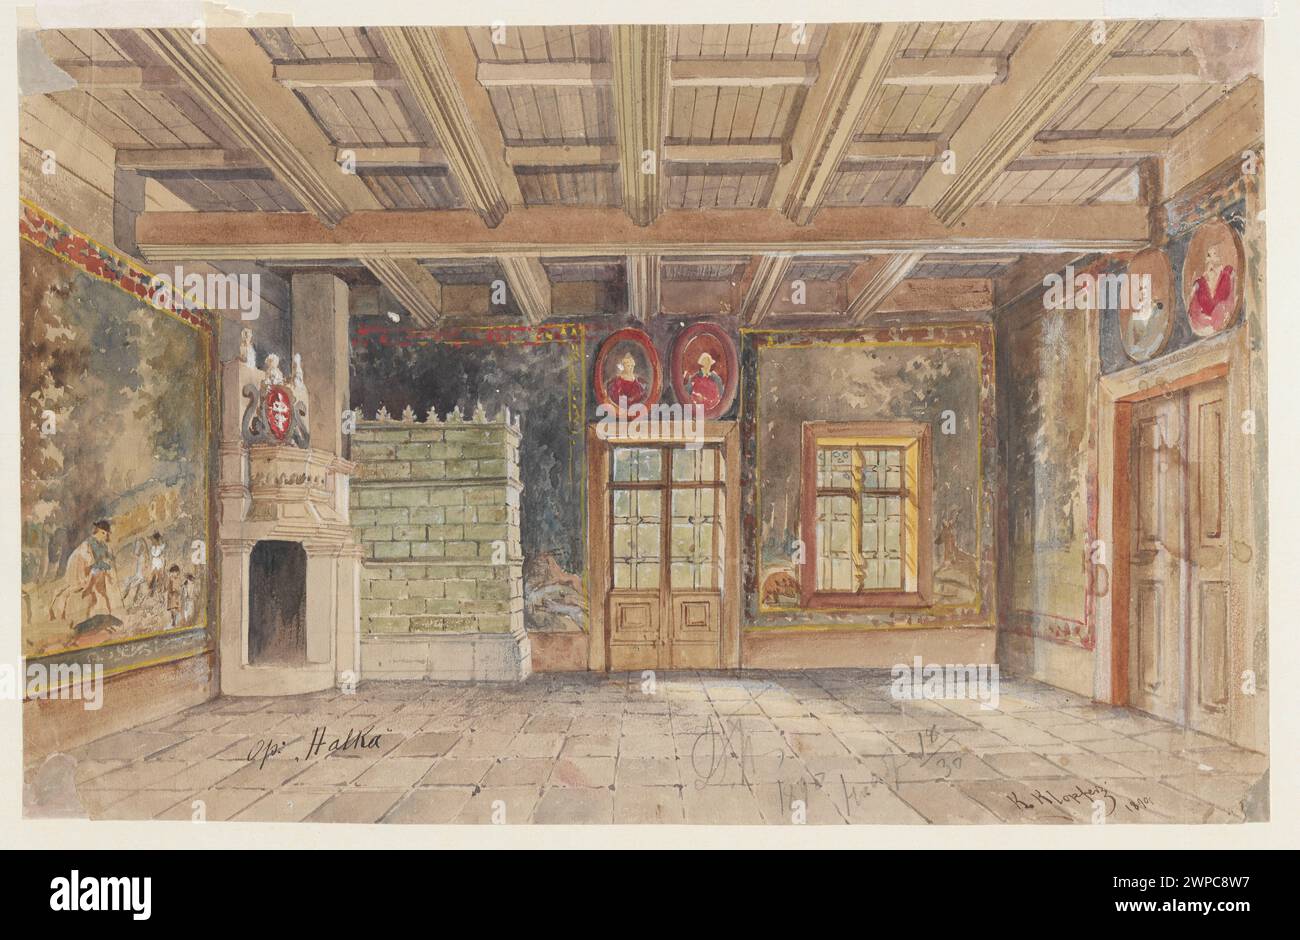 Decoration for the 'Halka' opera - great chamber; Verso: Schematic projection of the stage with marked inputs; Klopfer, Karol (1859-1937); 1890 (1890-00-00-1890-00-00);Klopfer, Karol (1859-1939)-collection, Moniuszko, Stanisław (1819-1872), Moniuszko, Stanisław (1819-1872). Halka, Grand Theater (Warsaw), Dar (provenance), theater decorations, fireplaces, images in compositions, operas, stoves, living rooms (interiors), set design, ceilings (architect.), Tapiseries, theater, theater, theater, interior, interior of the courts Stock Photo